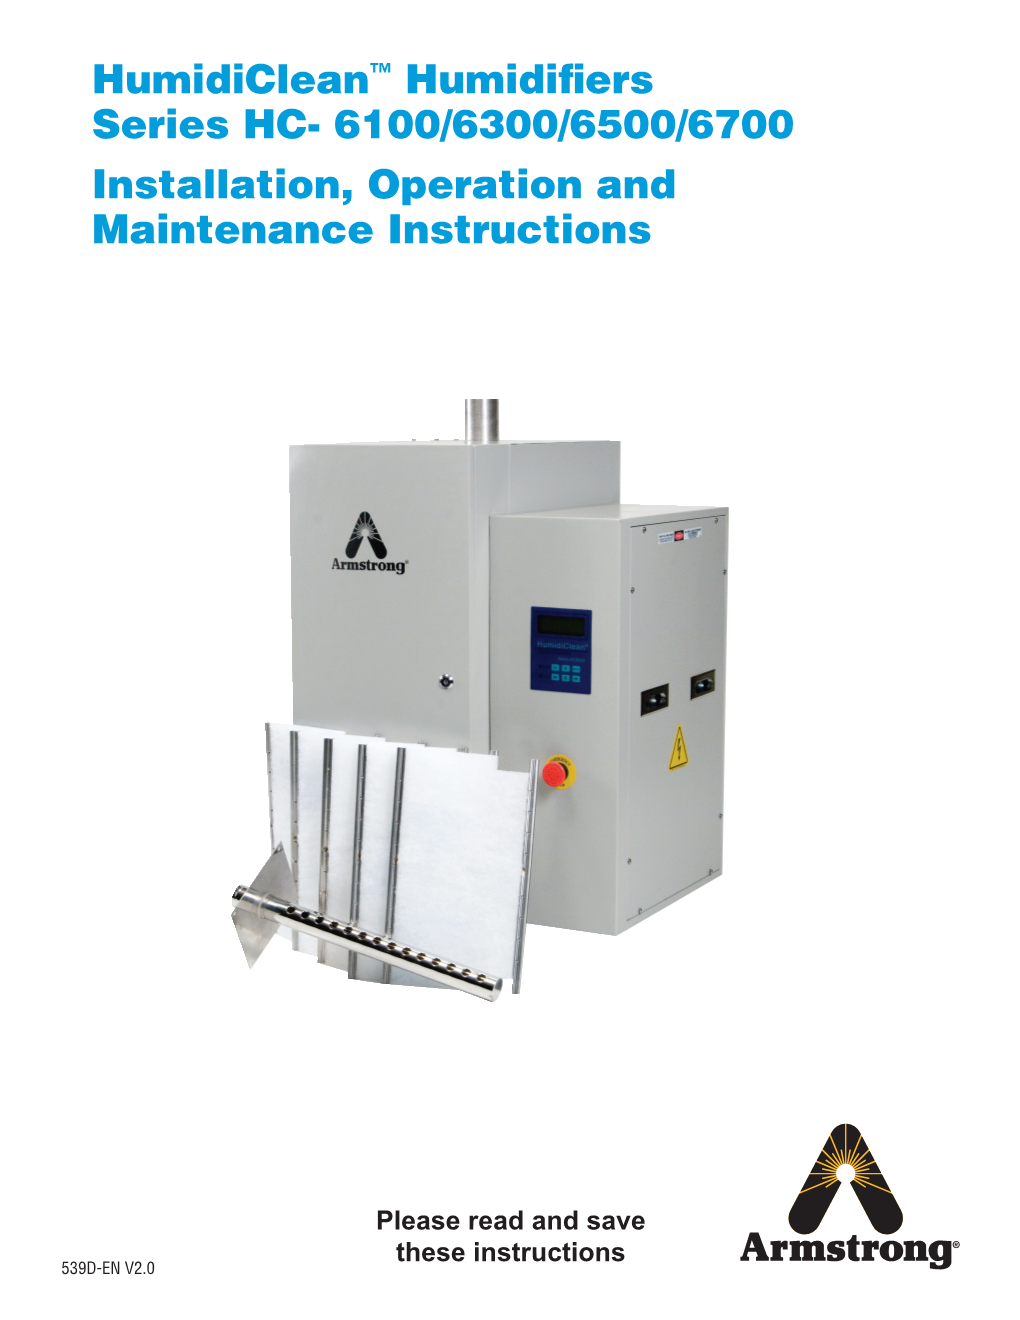 Humidiclean™ Humidifiers Series HC- 6100/6300/6500/6700 Installation, Operation and Maintenance Instructions